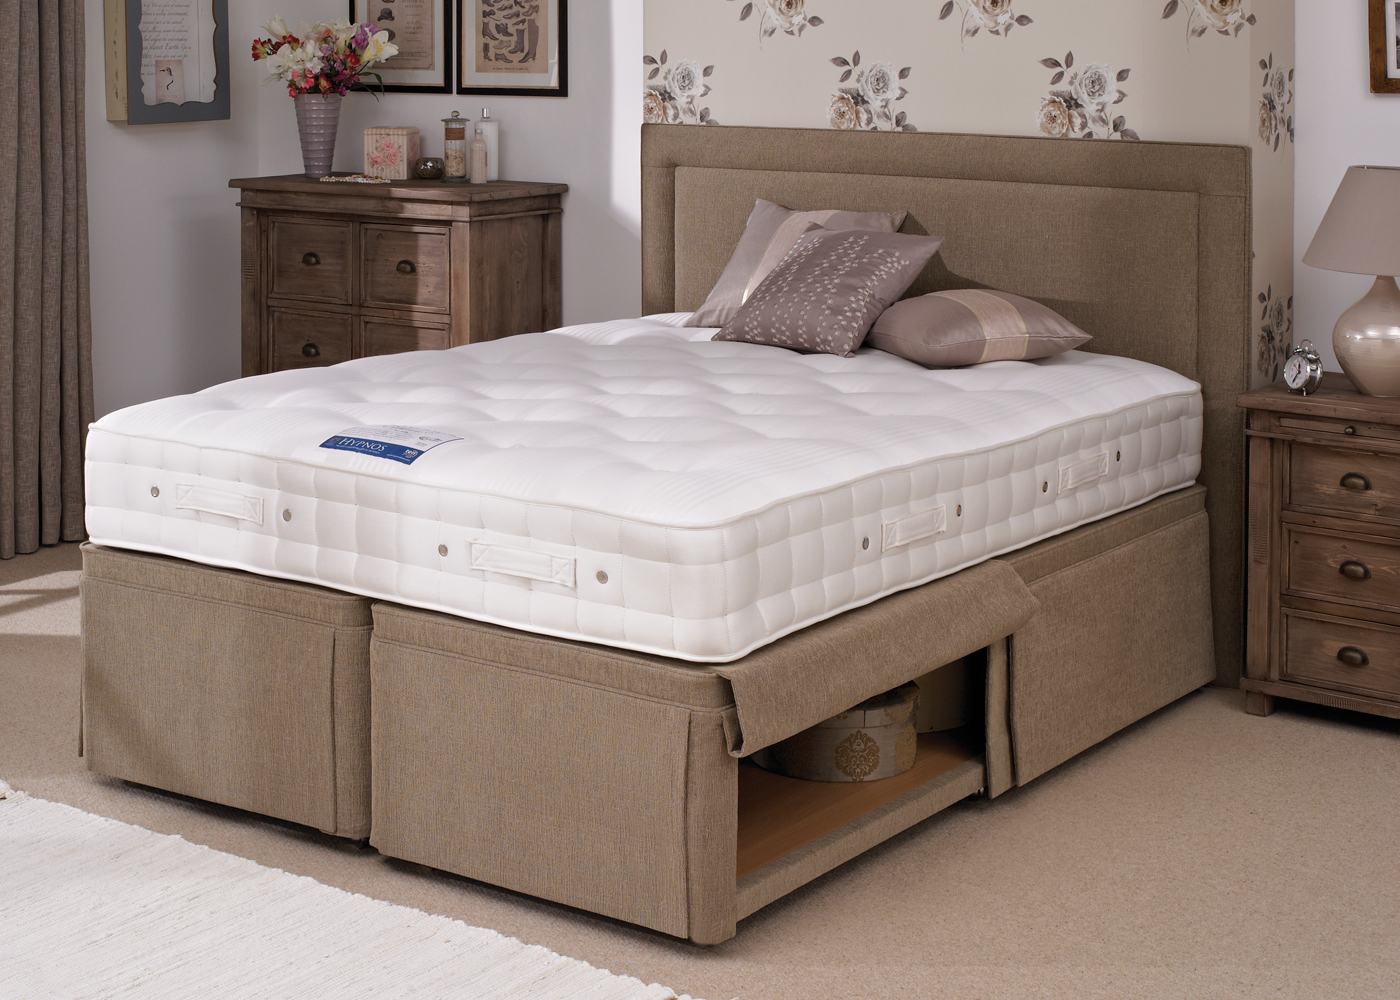 hypnos ortho gold deluxe super king size mattress